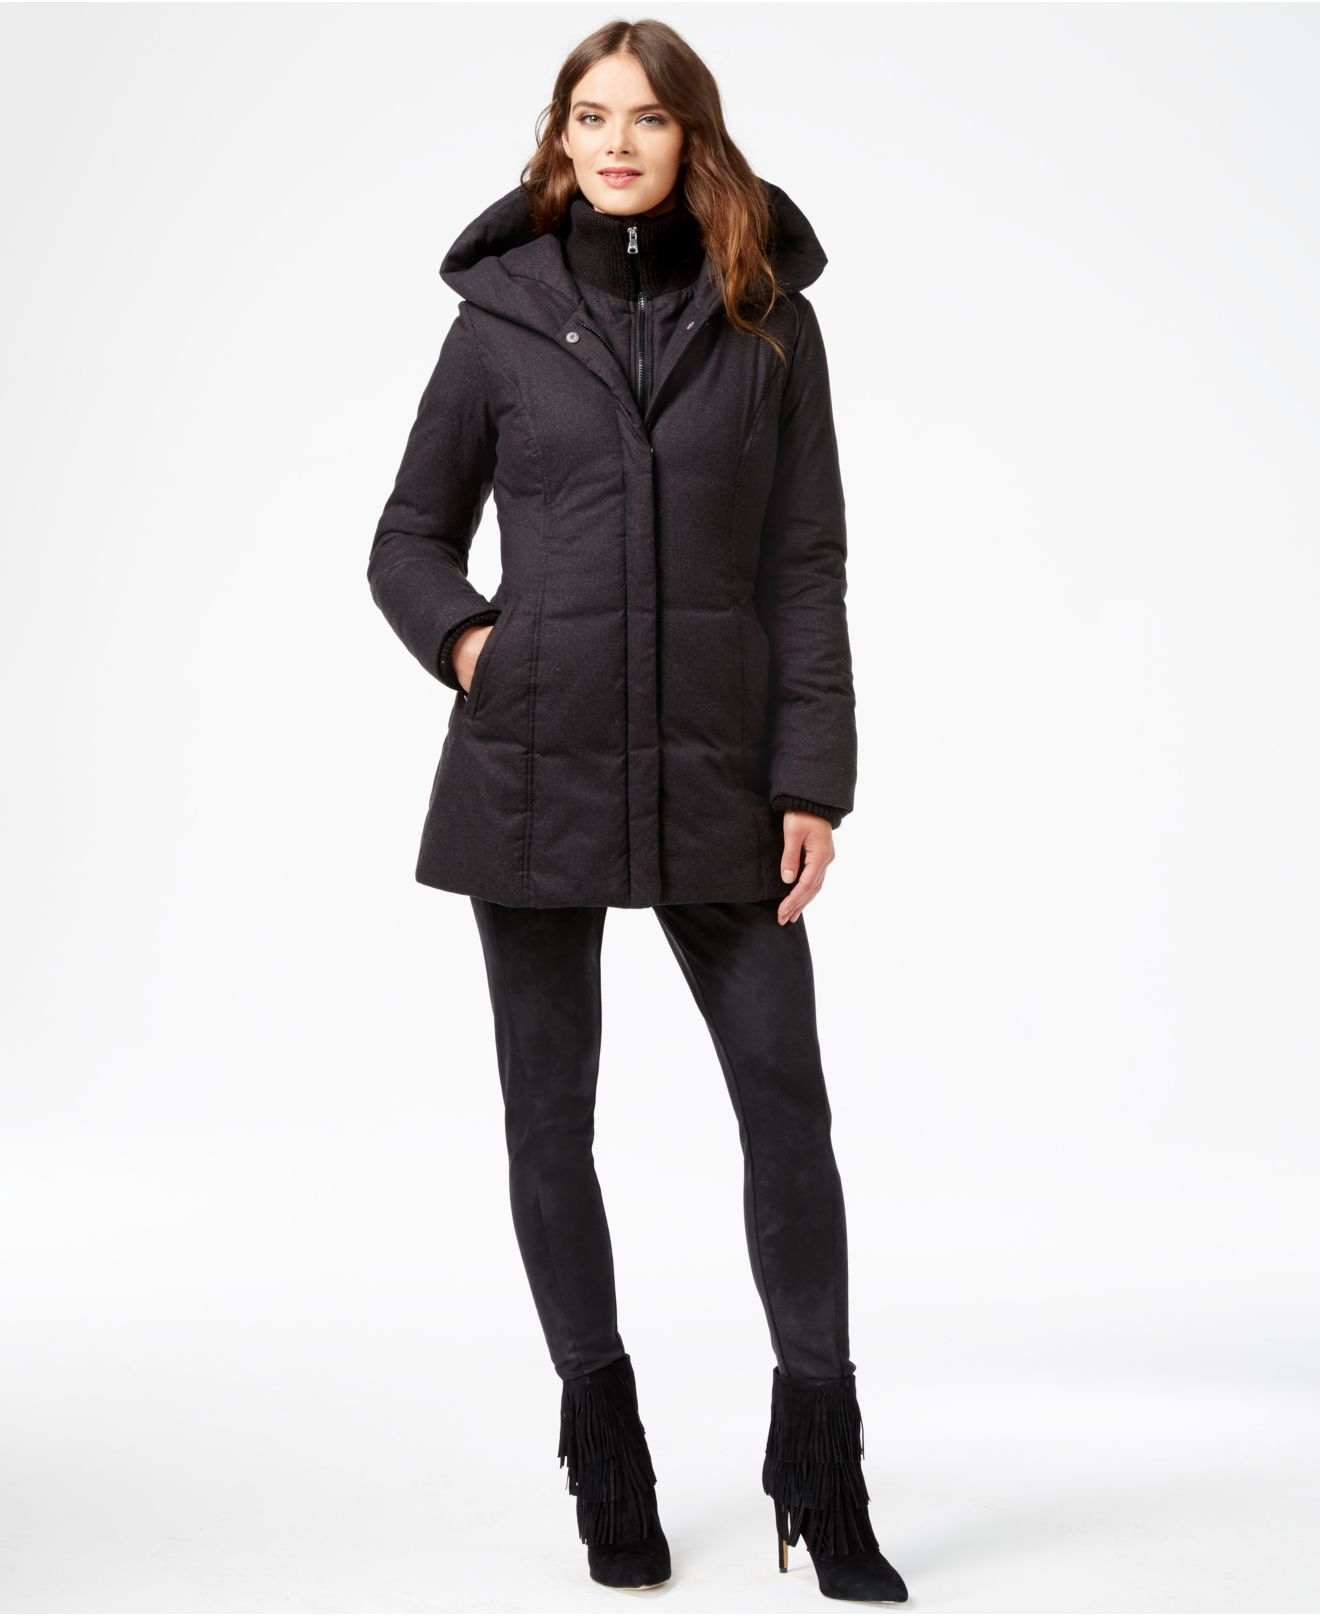 Lyst - Jessica simpson Hooded Layered Puffer Coat in Gray